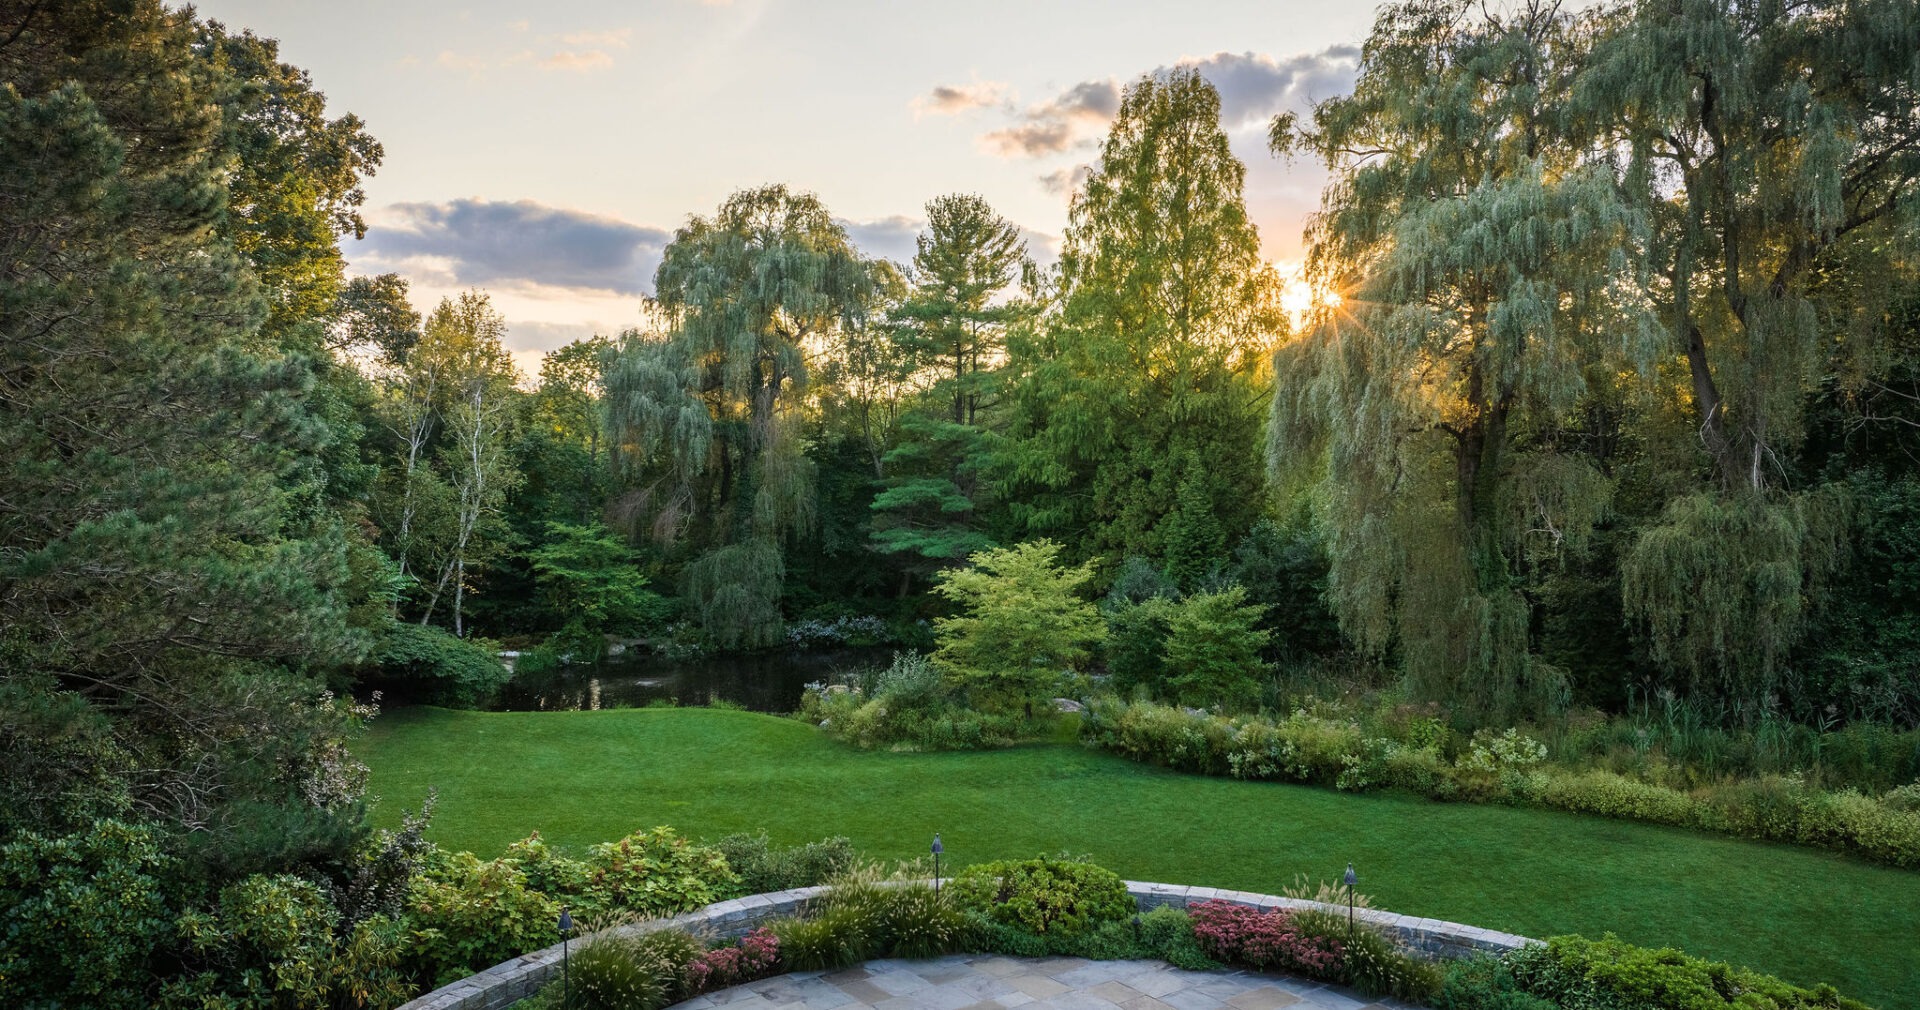 A serene garden at sunset with a pond, lush greenery, weeping willows, and a sun-kissed sky. A stone edge hints at a terrace in the foreground.